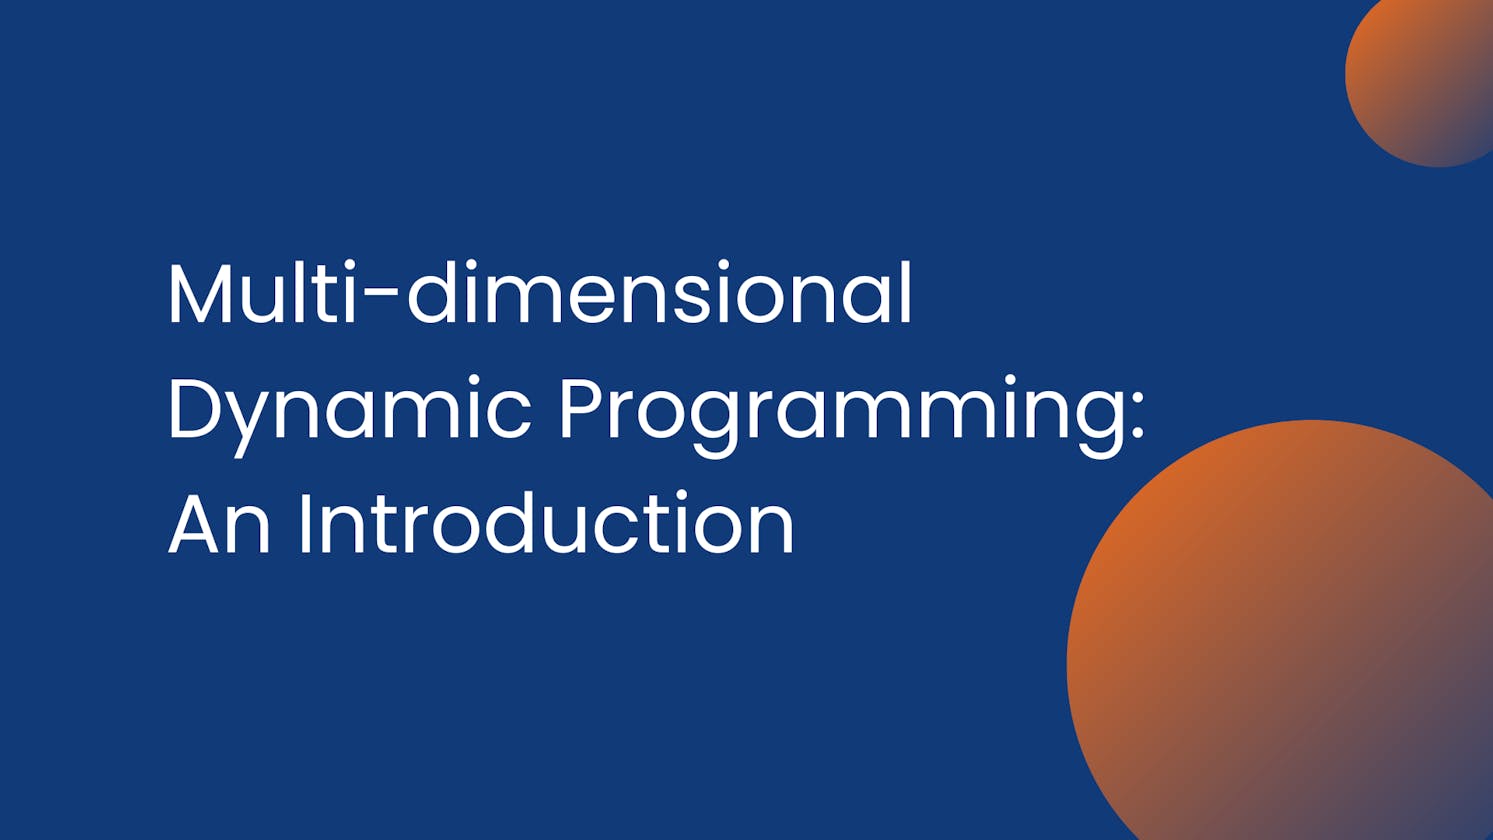 Multi-dimensional Dynamic Programming: An Introduction